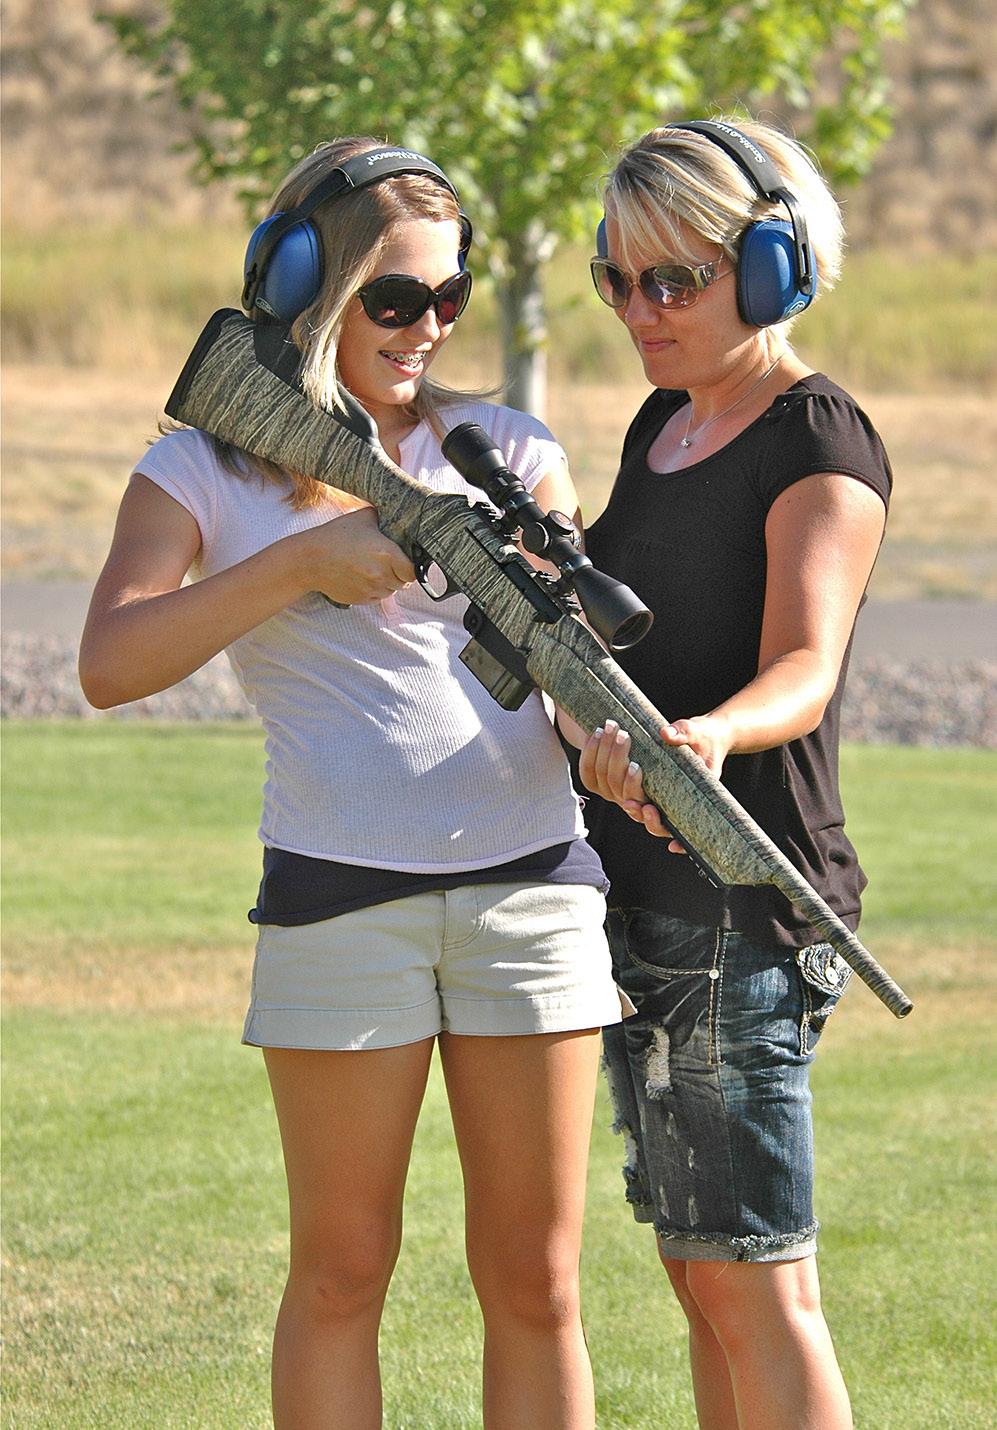 Hunting and target shooting are among the safest of all sports.